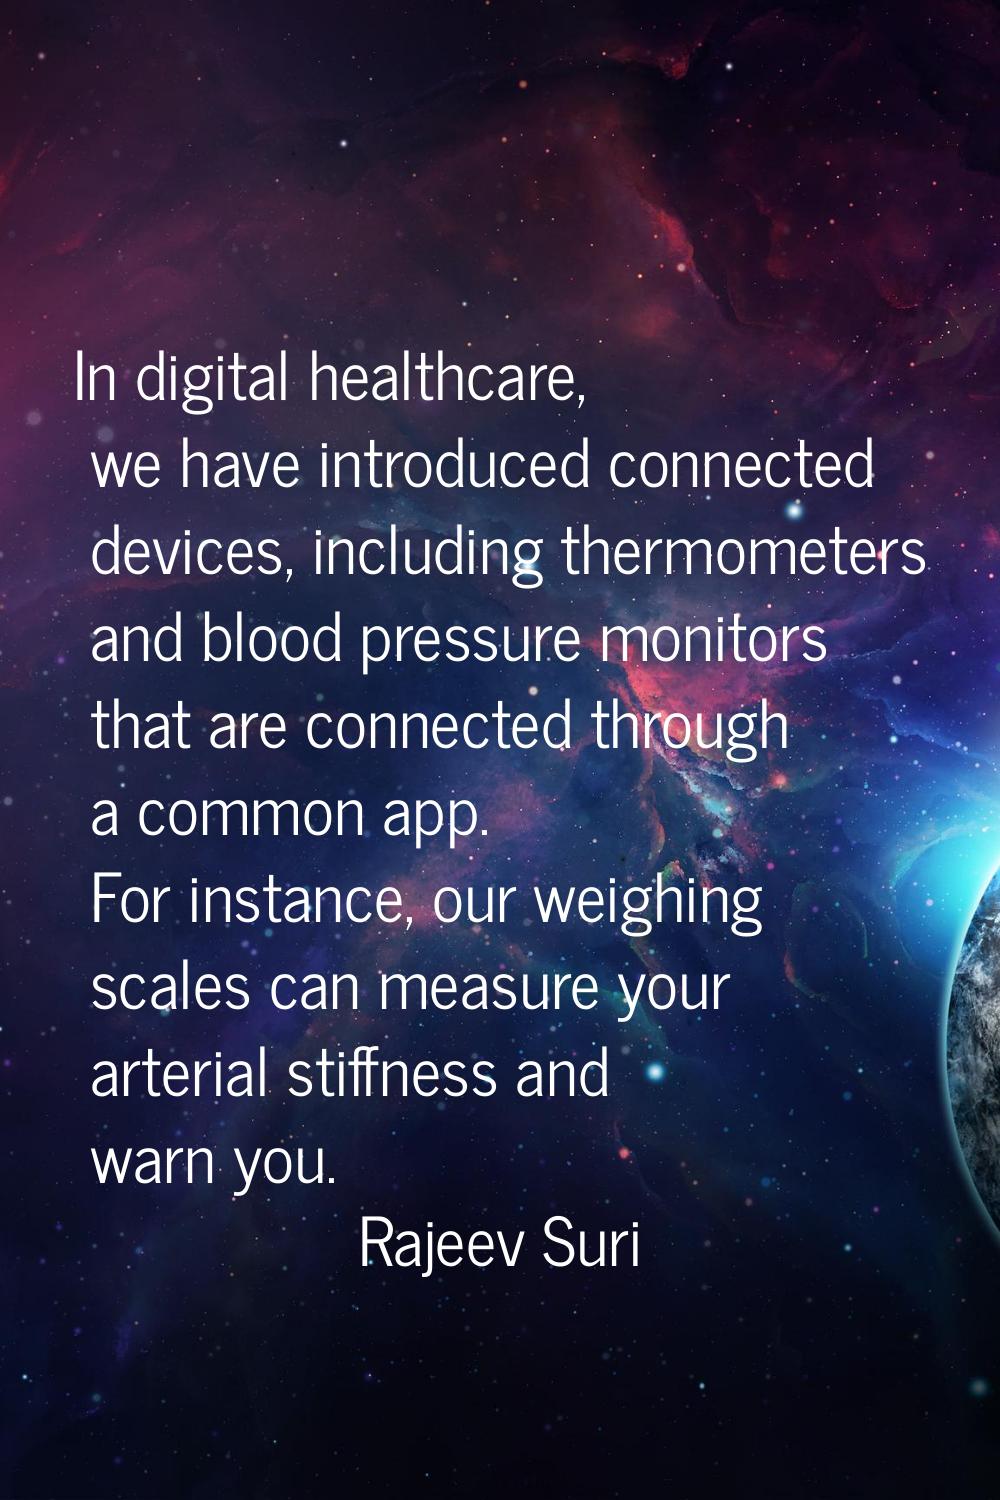 In digital healthcare, we have introduced connected devices, including thermometers and blood press